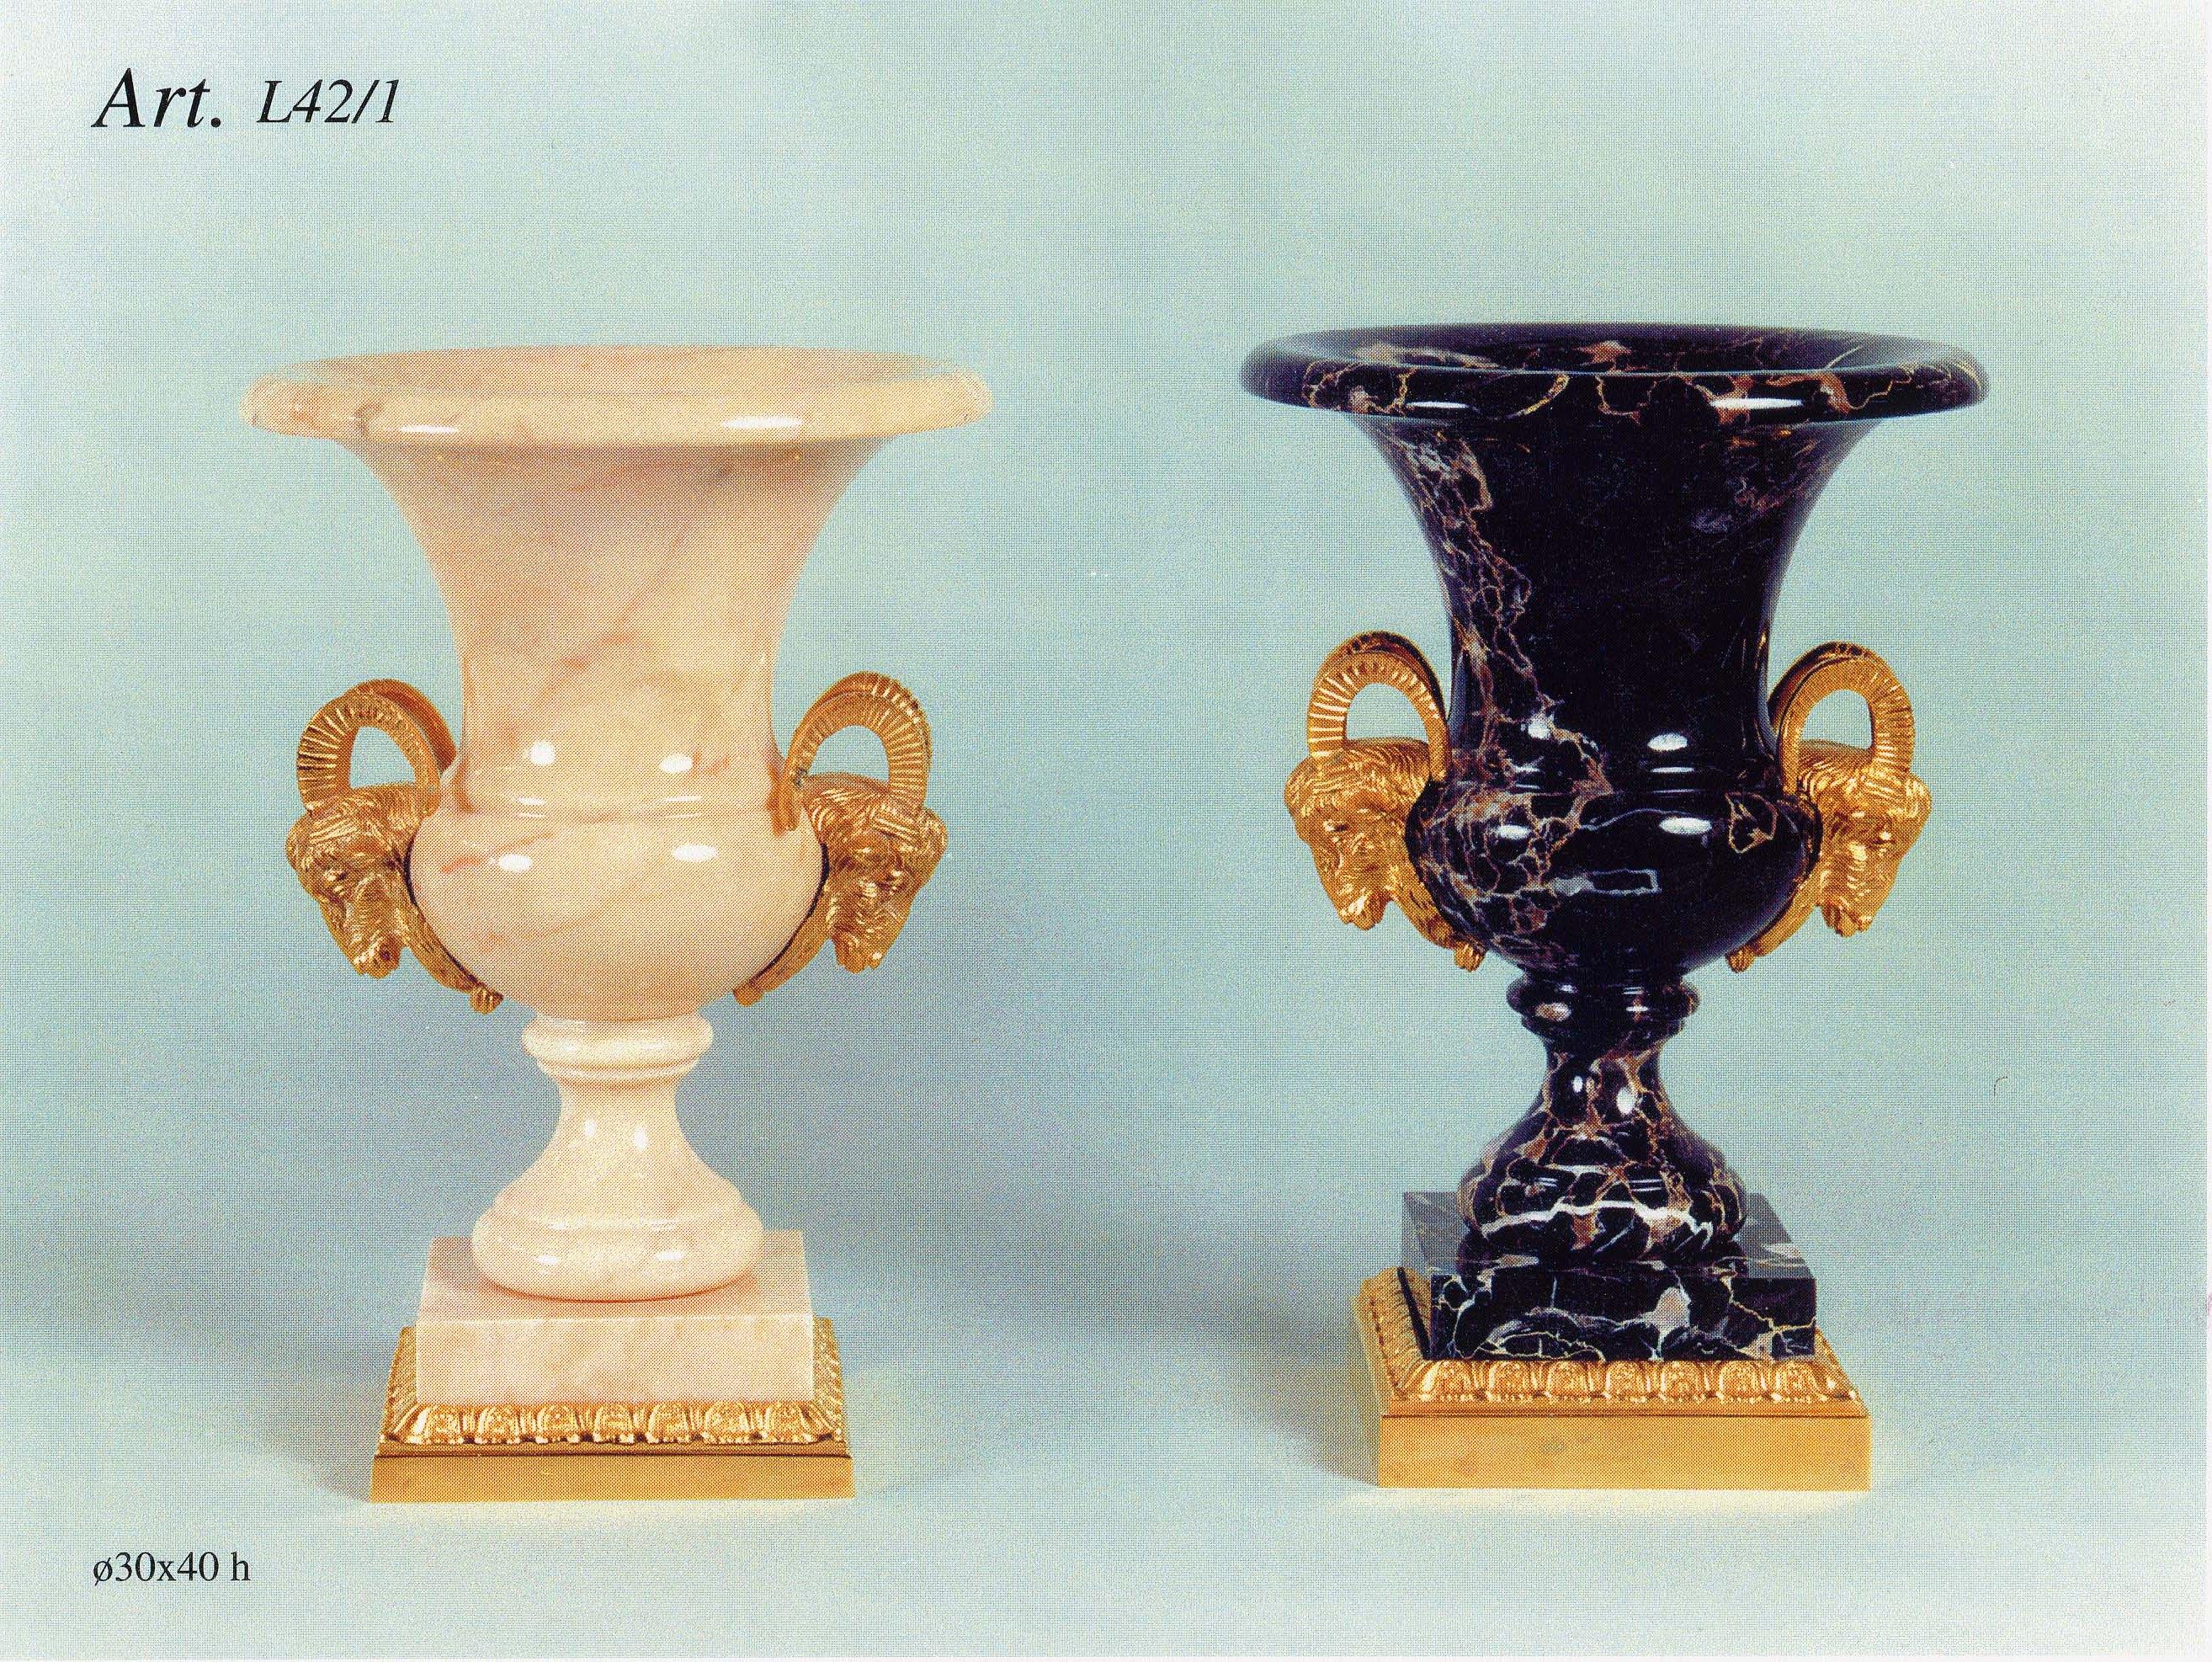 Neoclassical style marble and gilt bronze vase by Gherardo Degli Albizzi.
The shape comes from the Greek Kalyx type, quite common in antique, Greece. The vase under the small neck rests on a square base. Under this, there is a gilt bronze counter